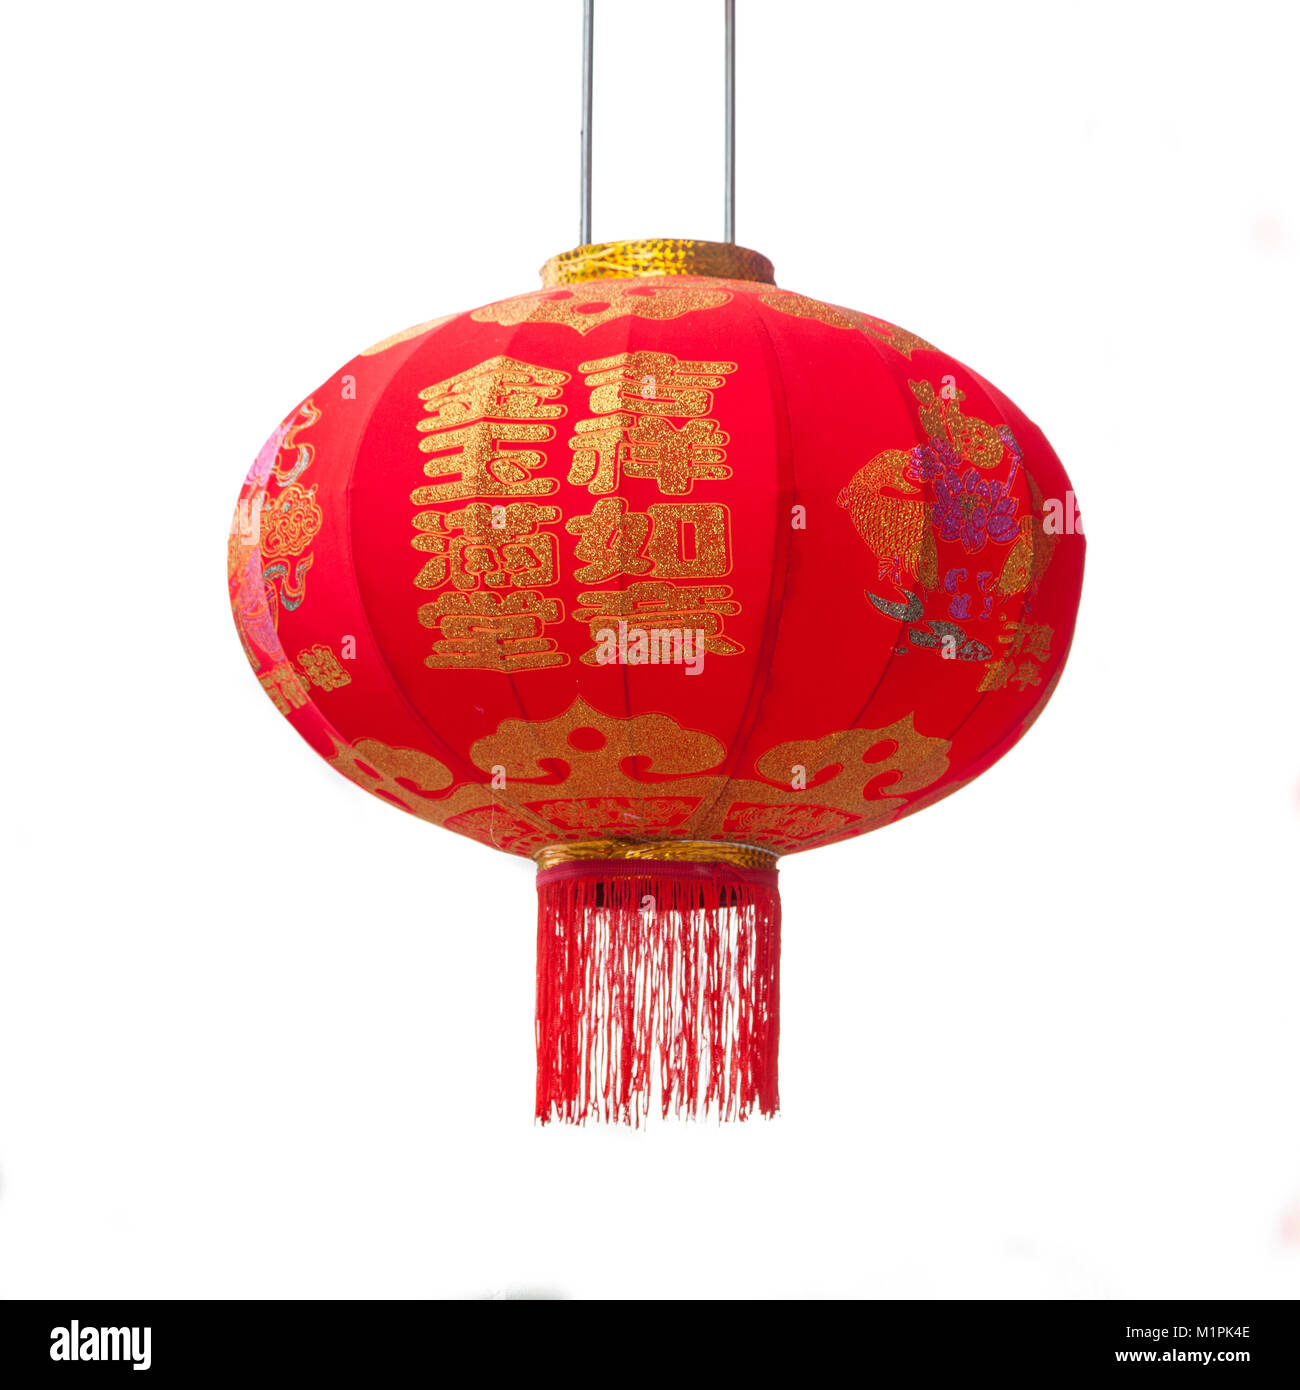 Chinese traditional festival red lantern isolated on white background.The text on lantern means fortune and lucky,normally used for festival blessings Stock Photo